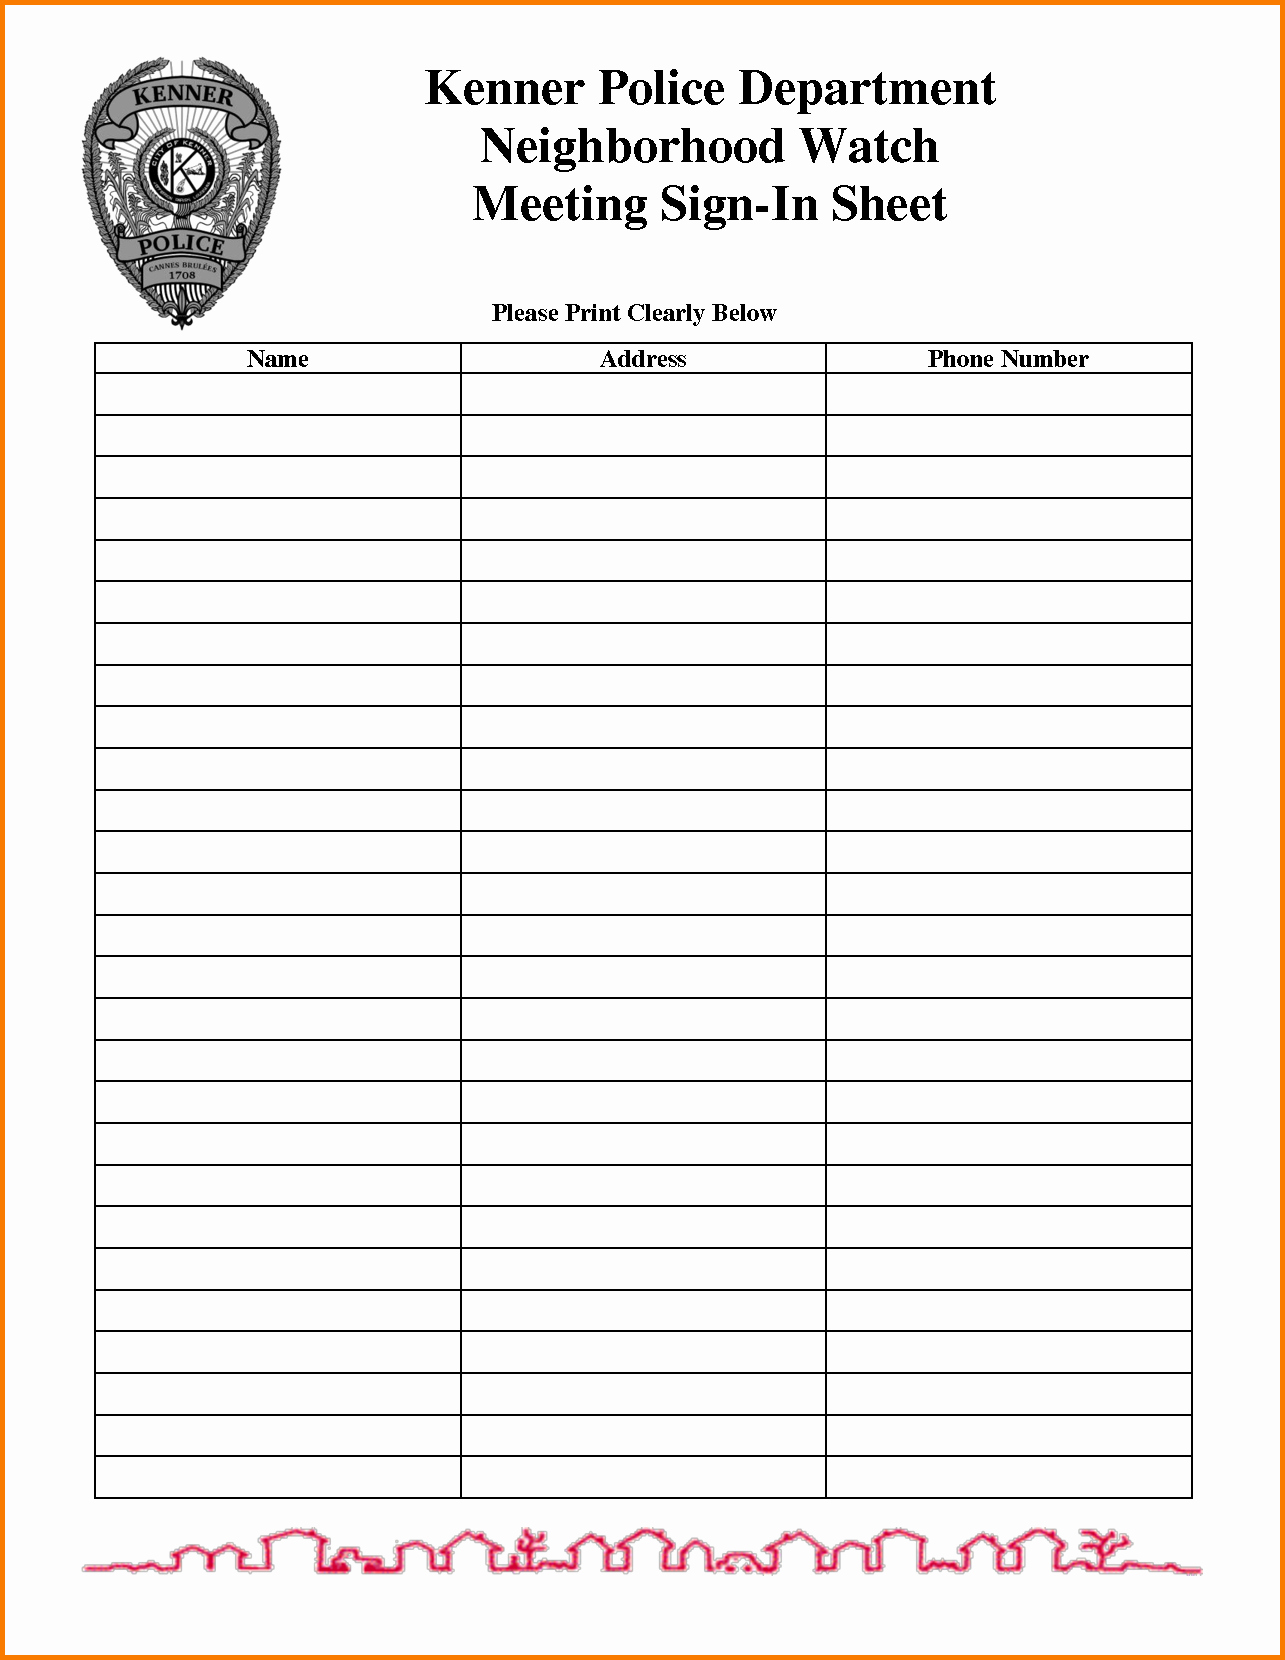 Appointment Sign In Sheet Template Lovely Meeting Sign In Sheet Template